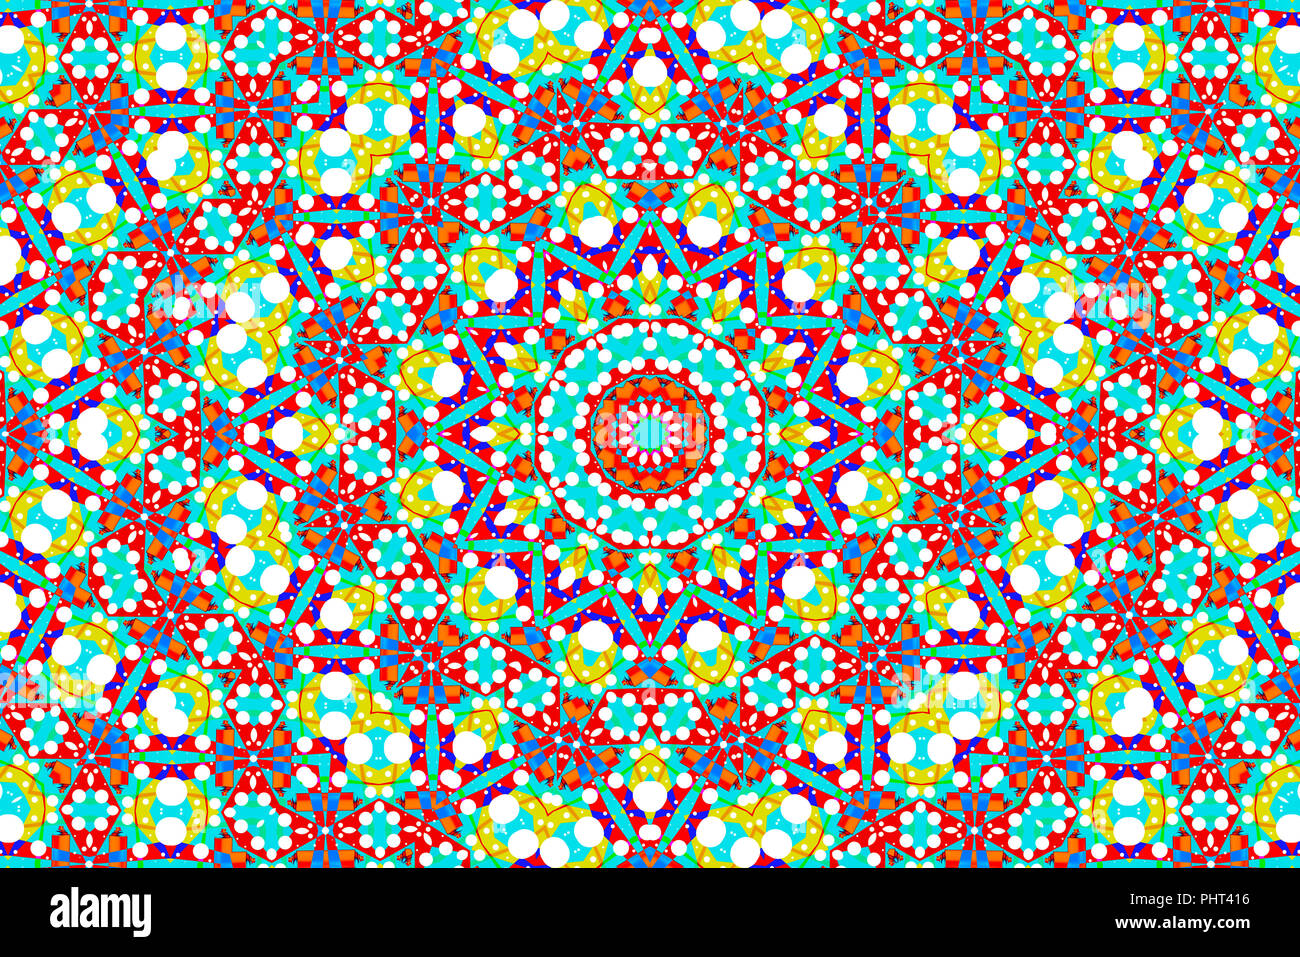 Abstract kaleidoscope pattern background, colorful reflective mirroring backdrop as graphic design element Stock Photo